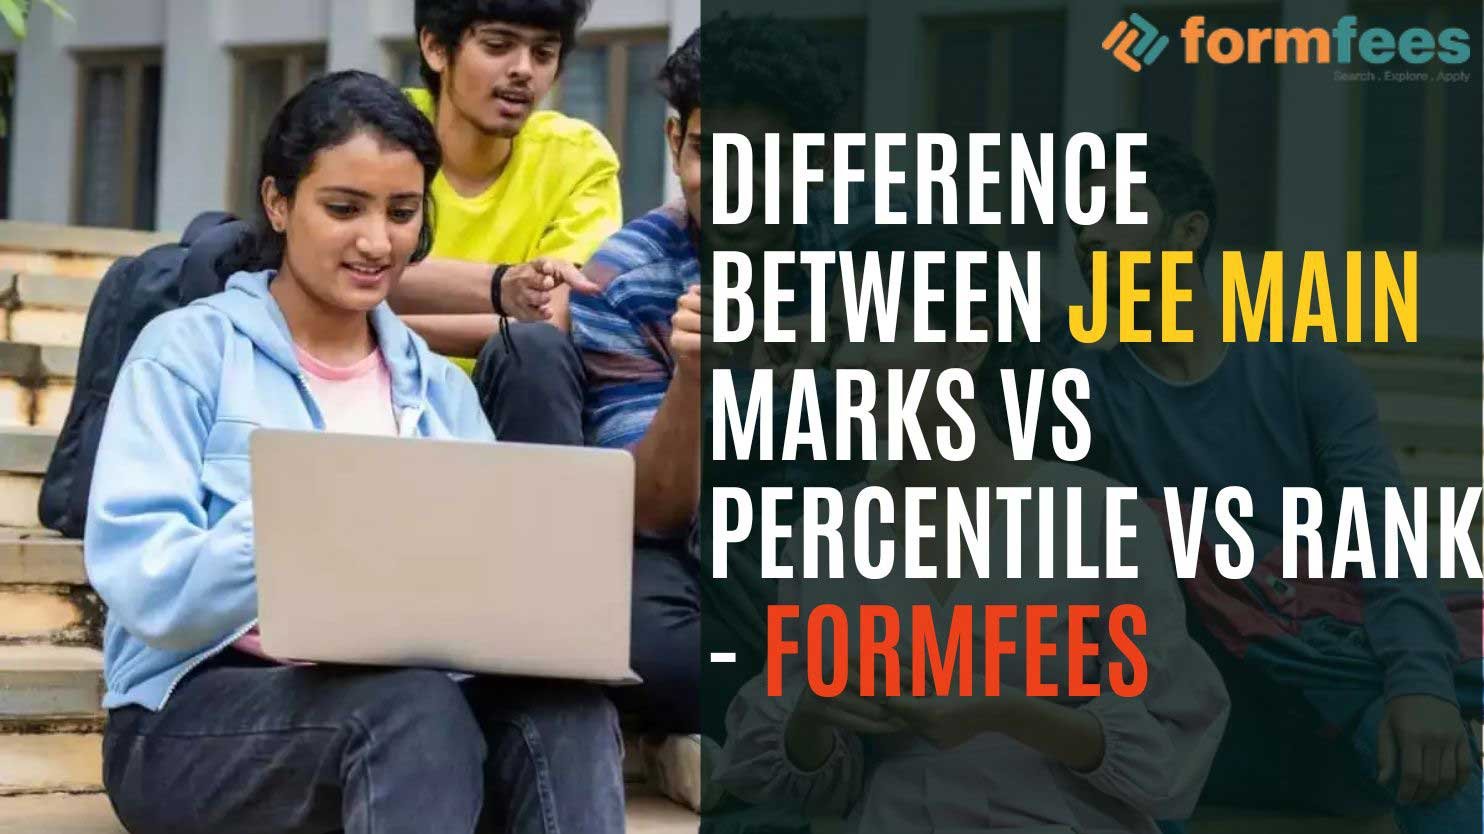 Difference between JEE Main Marks vs Percentile vs Rank – Formfees